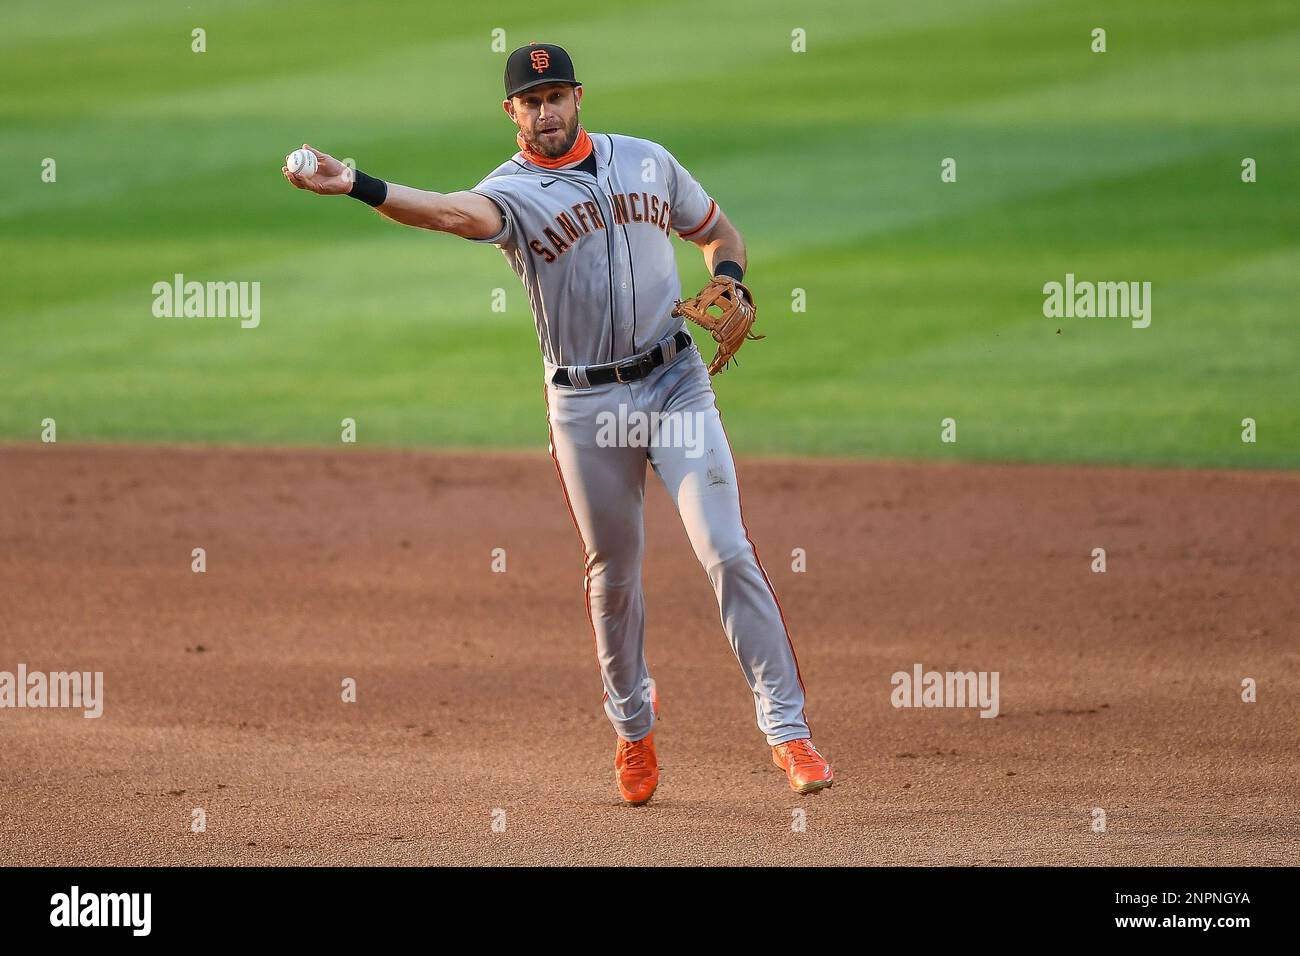 DENVER, CO - AUGUST 04: San Francisco Giants third baseman Evan Longoria  (10) throws to first base after fielding a ground ball during a game  against the Colorado Rockies at Coors Field